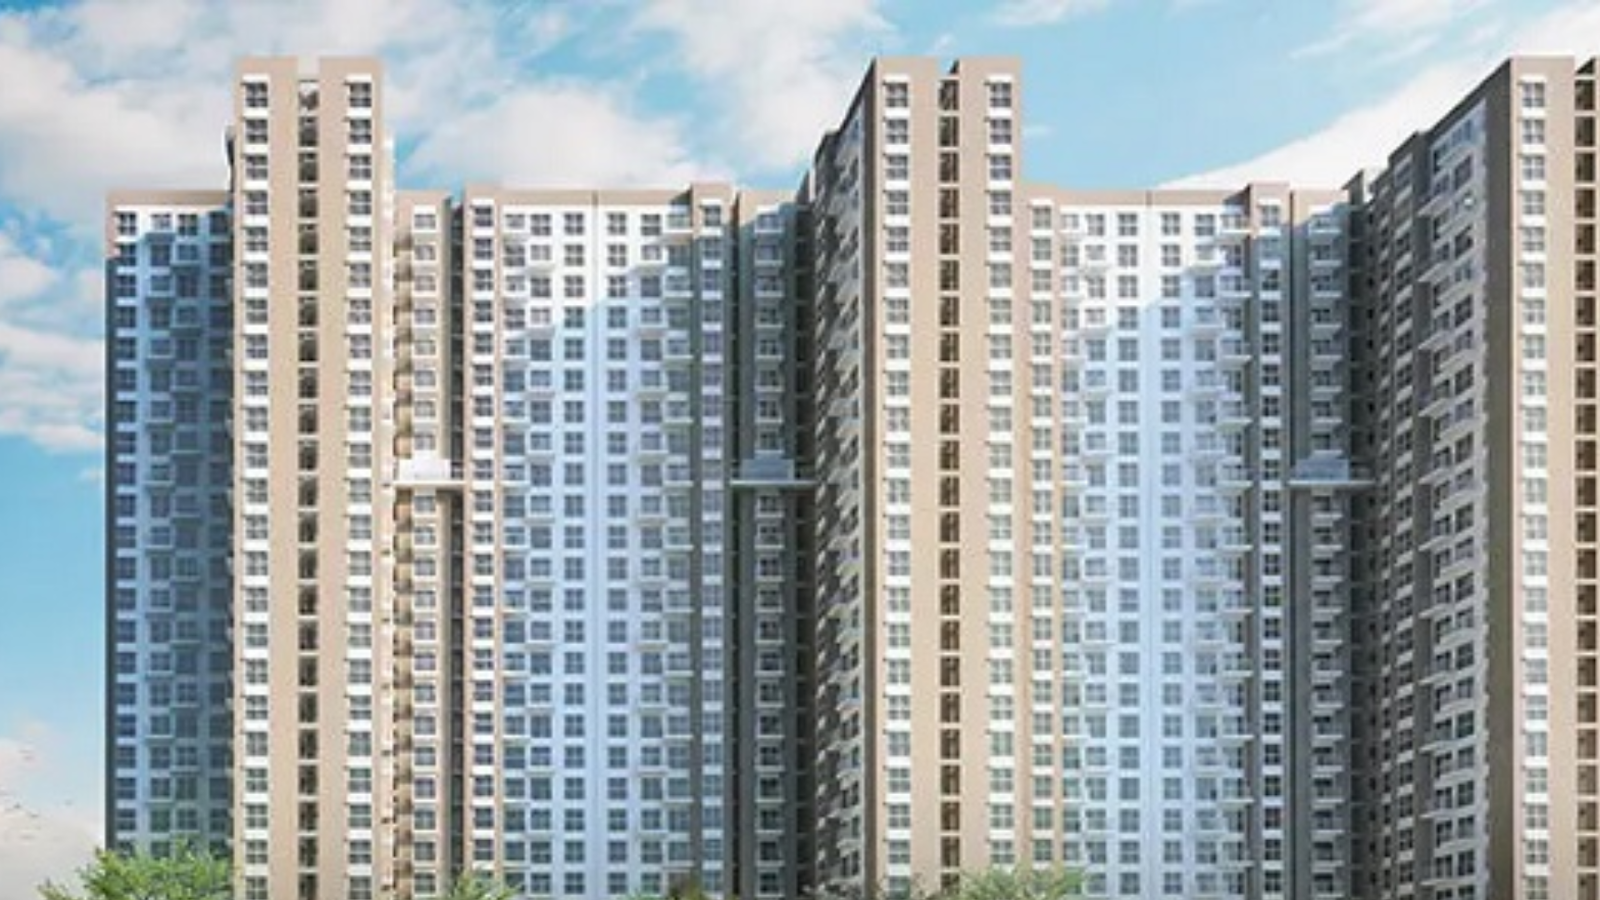 The most iconic development in Bangalore is named Godrej Ananda.